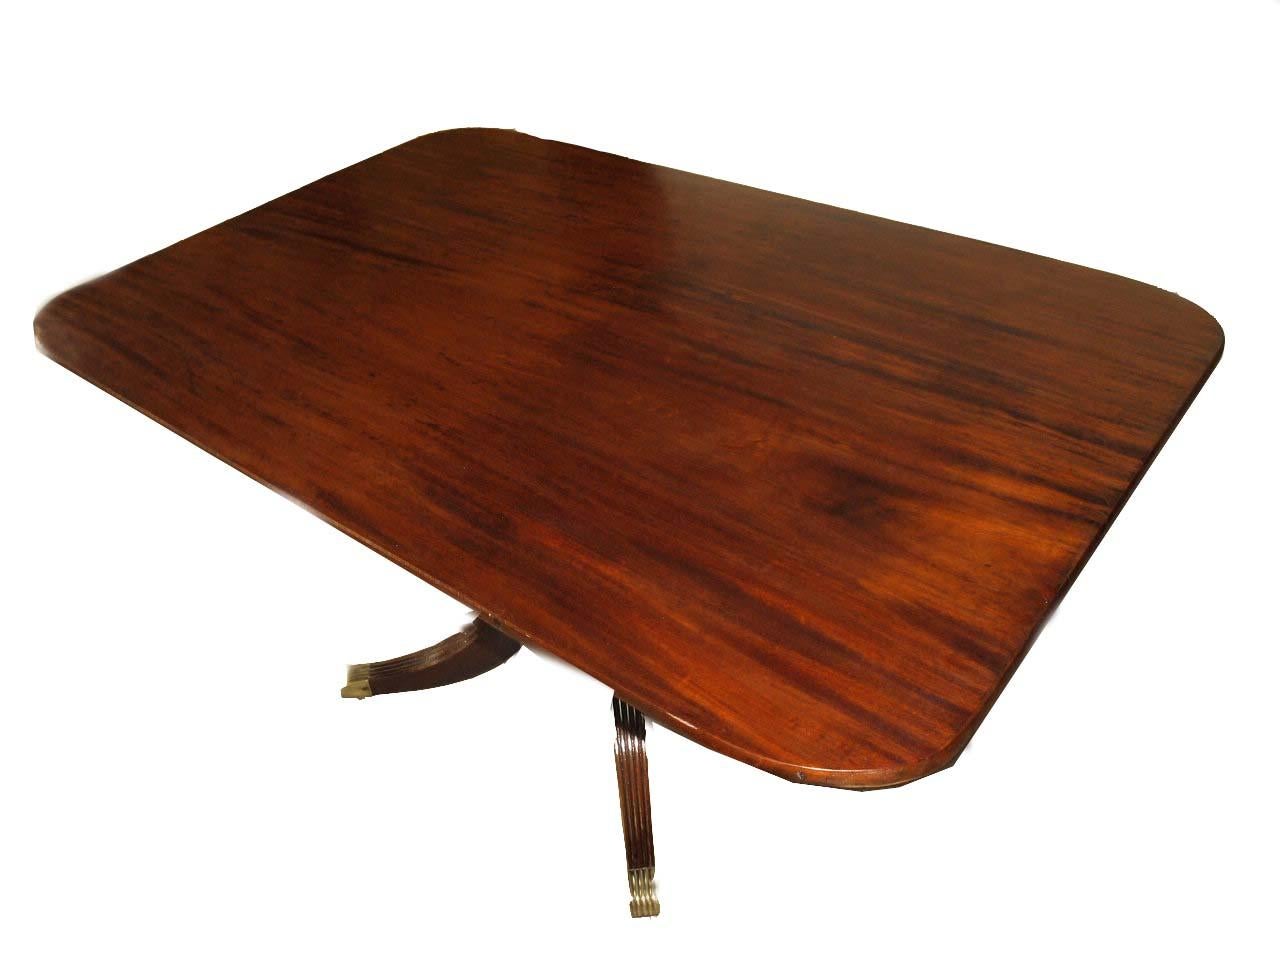 Turned English Sheraton Breakfast Table For Sale